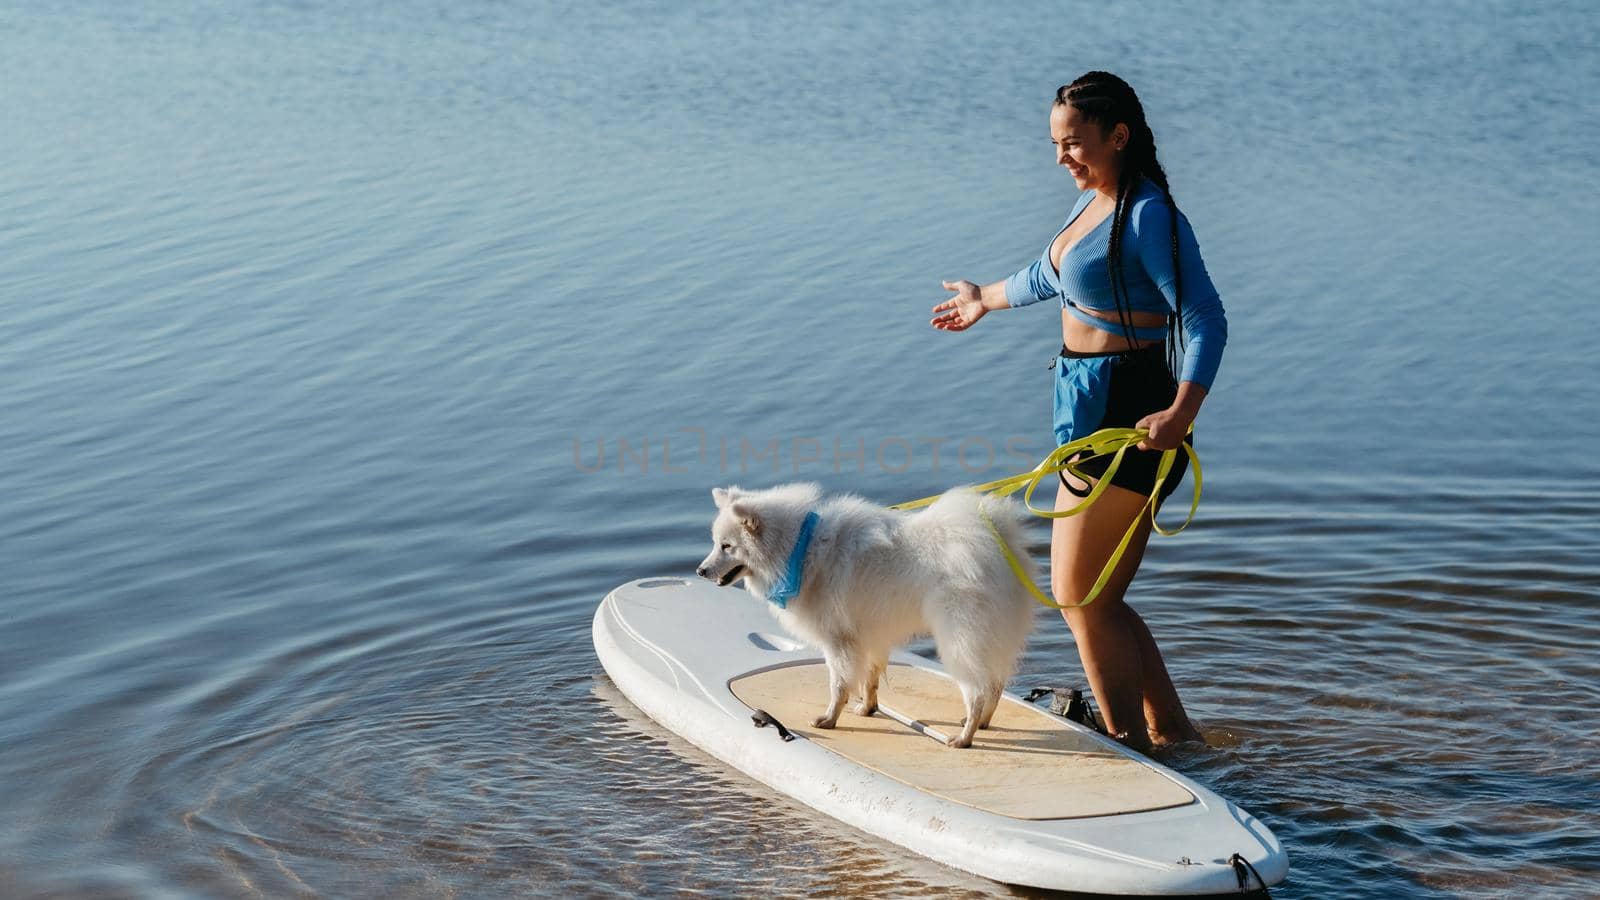 Woman Preparing to Paddleboarding with Her Dog Japanese Spitz Sitting on Sup Board on Lake